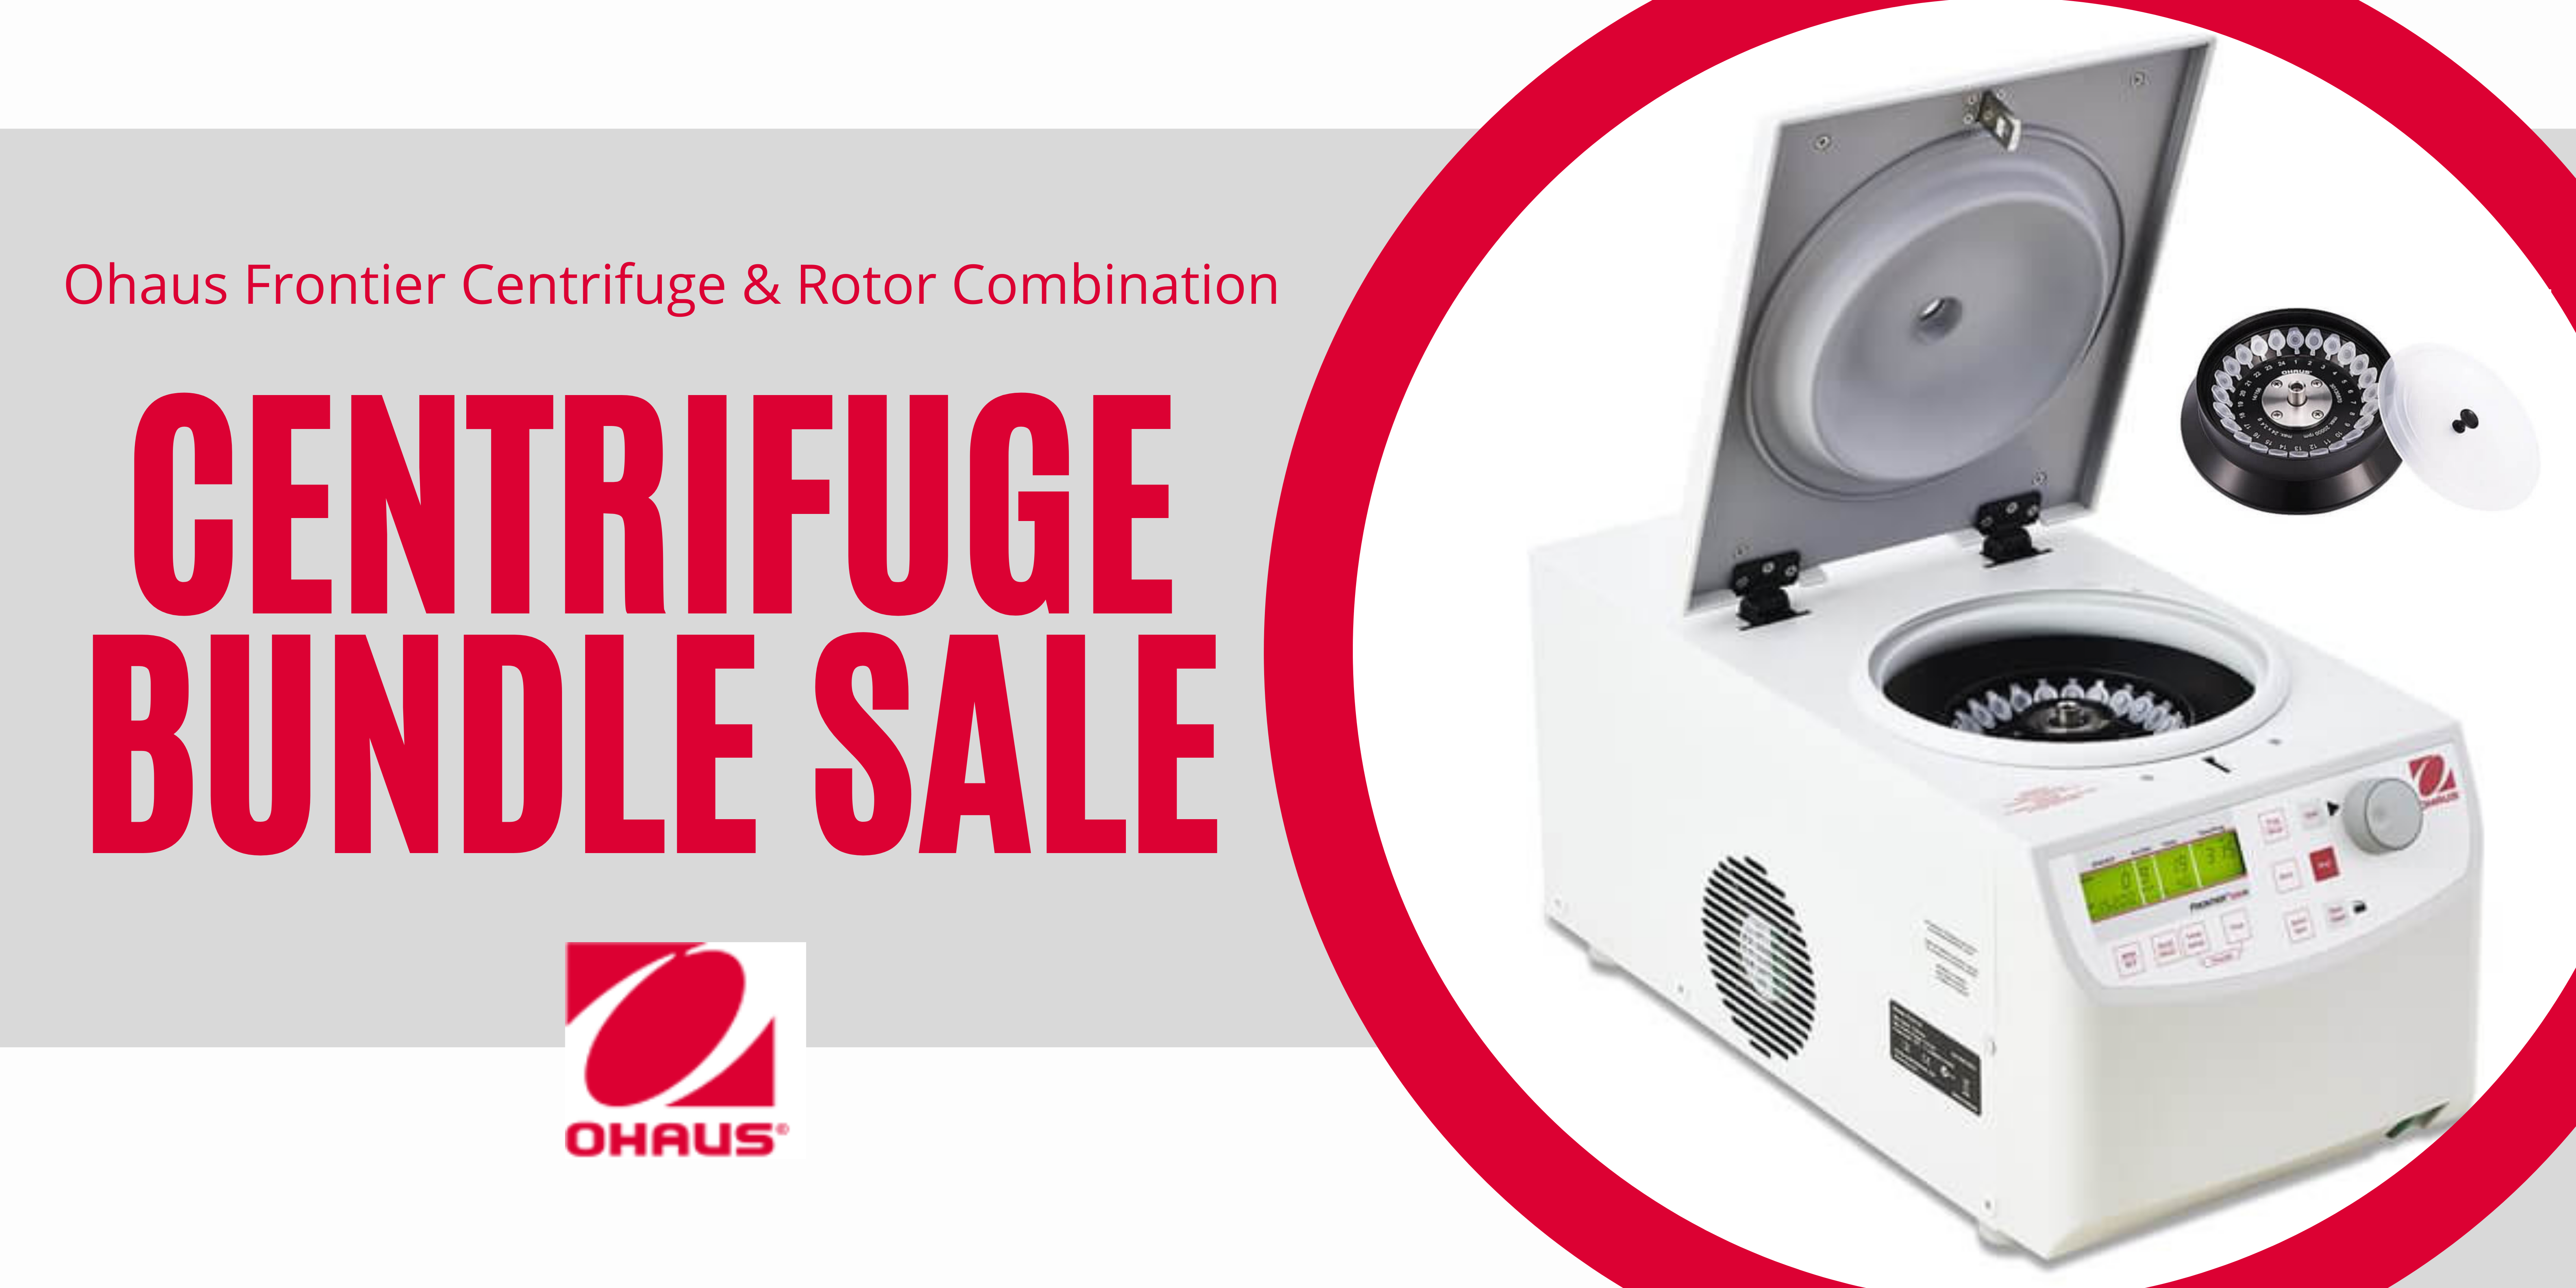 End of The Year Promotion - Save up to 40% on Ohaus Centrifuge Bundles